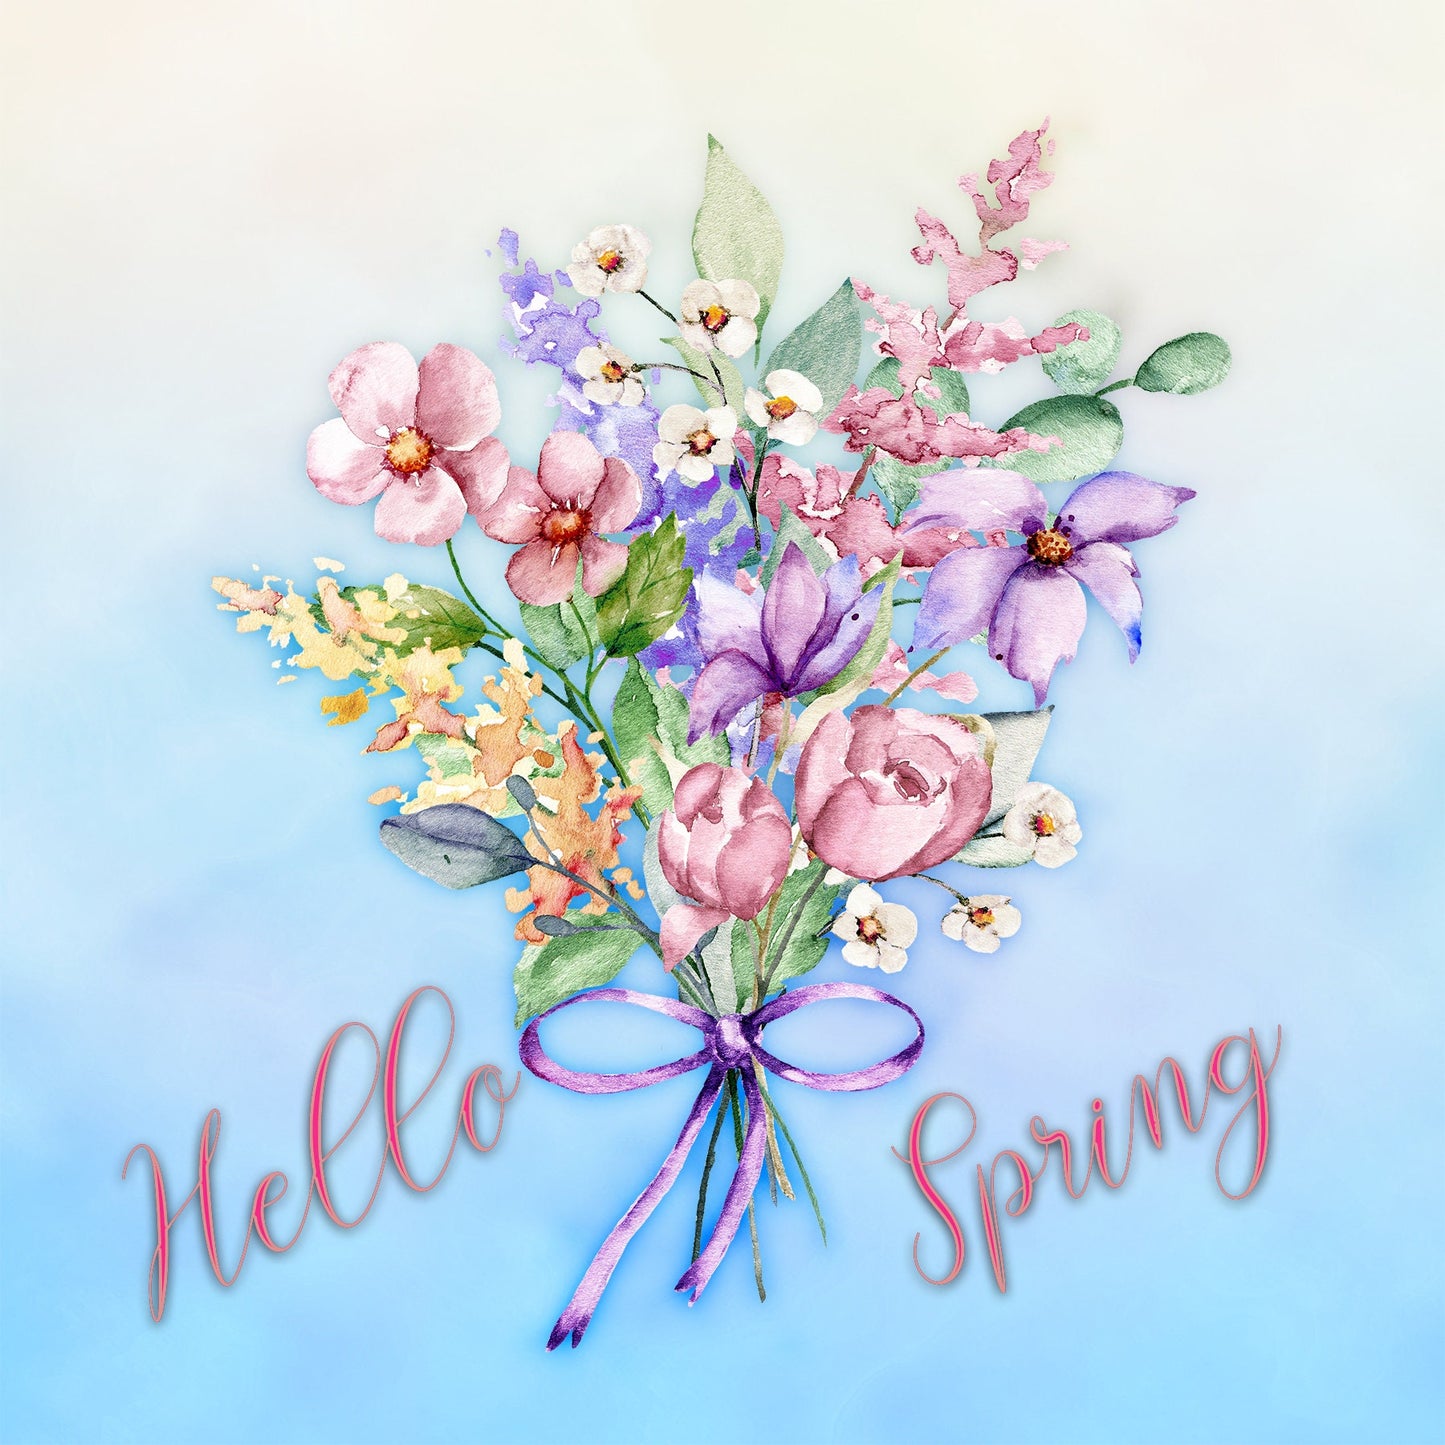 Hello Spring Bouquet Art Decorative Ceramic Tile with Optional Easel Back - Available in 3 Sizes